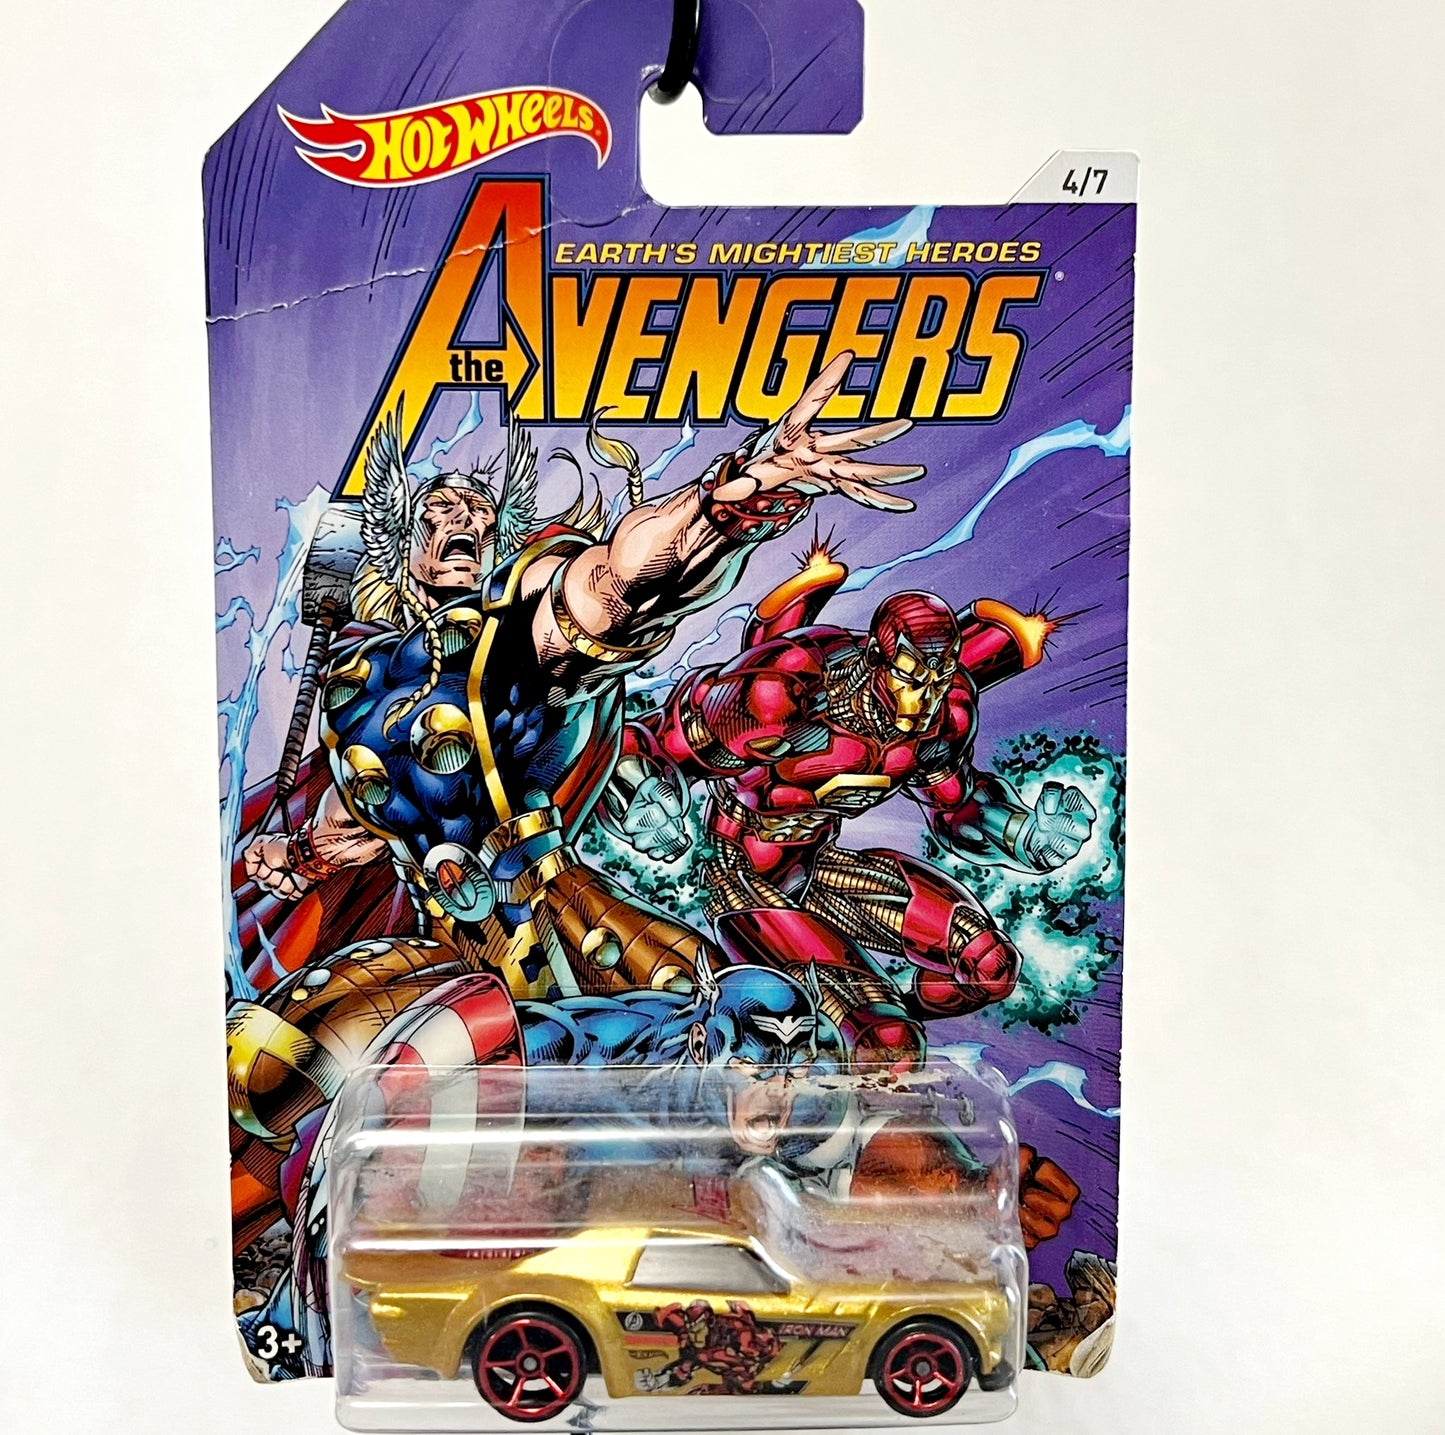 New *3 Hot Wheels/The Avengers Die-Cast Cars 1/7